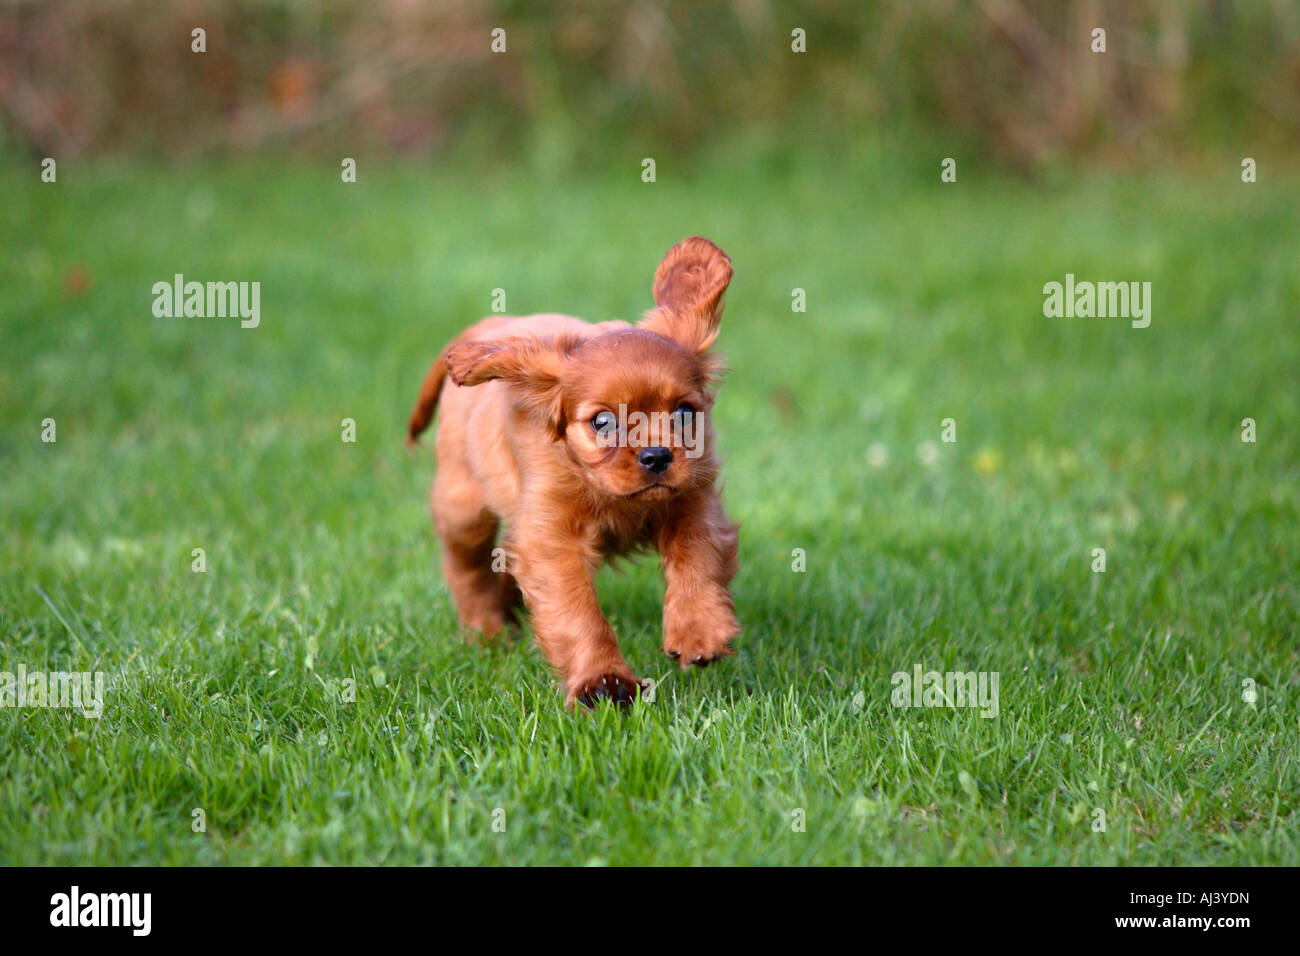 Cavalier King Charles Spaniel puppy ruby 10 weeks Stock Photo